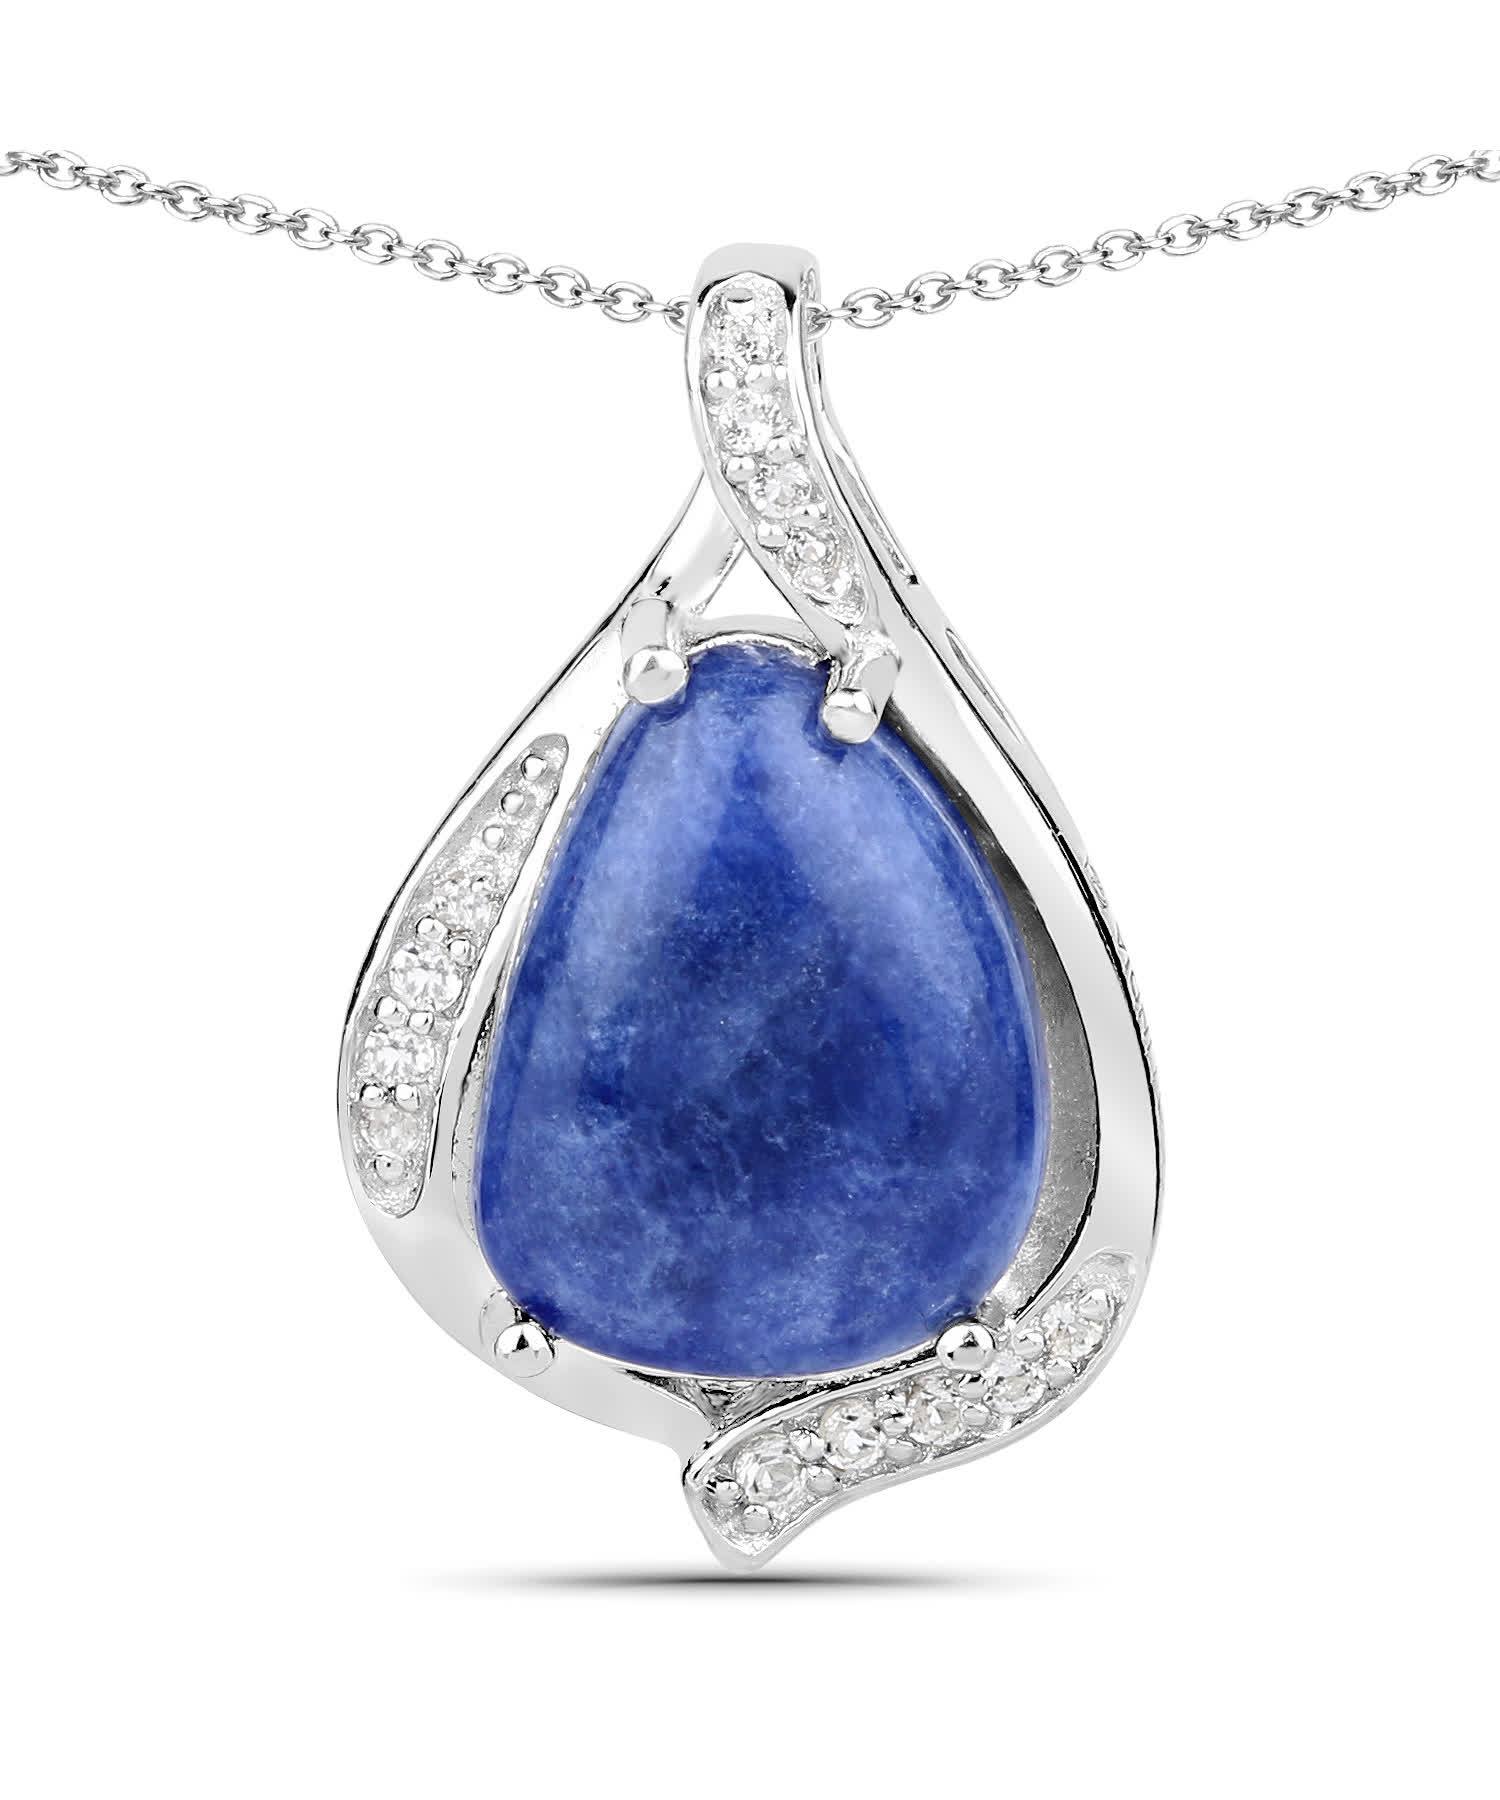 2.41ctw Natural Aventurine and Topaz Rhodium Plated 925 Sterling Silver Drop Pendant With Chain View 1